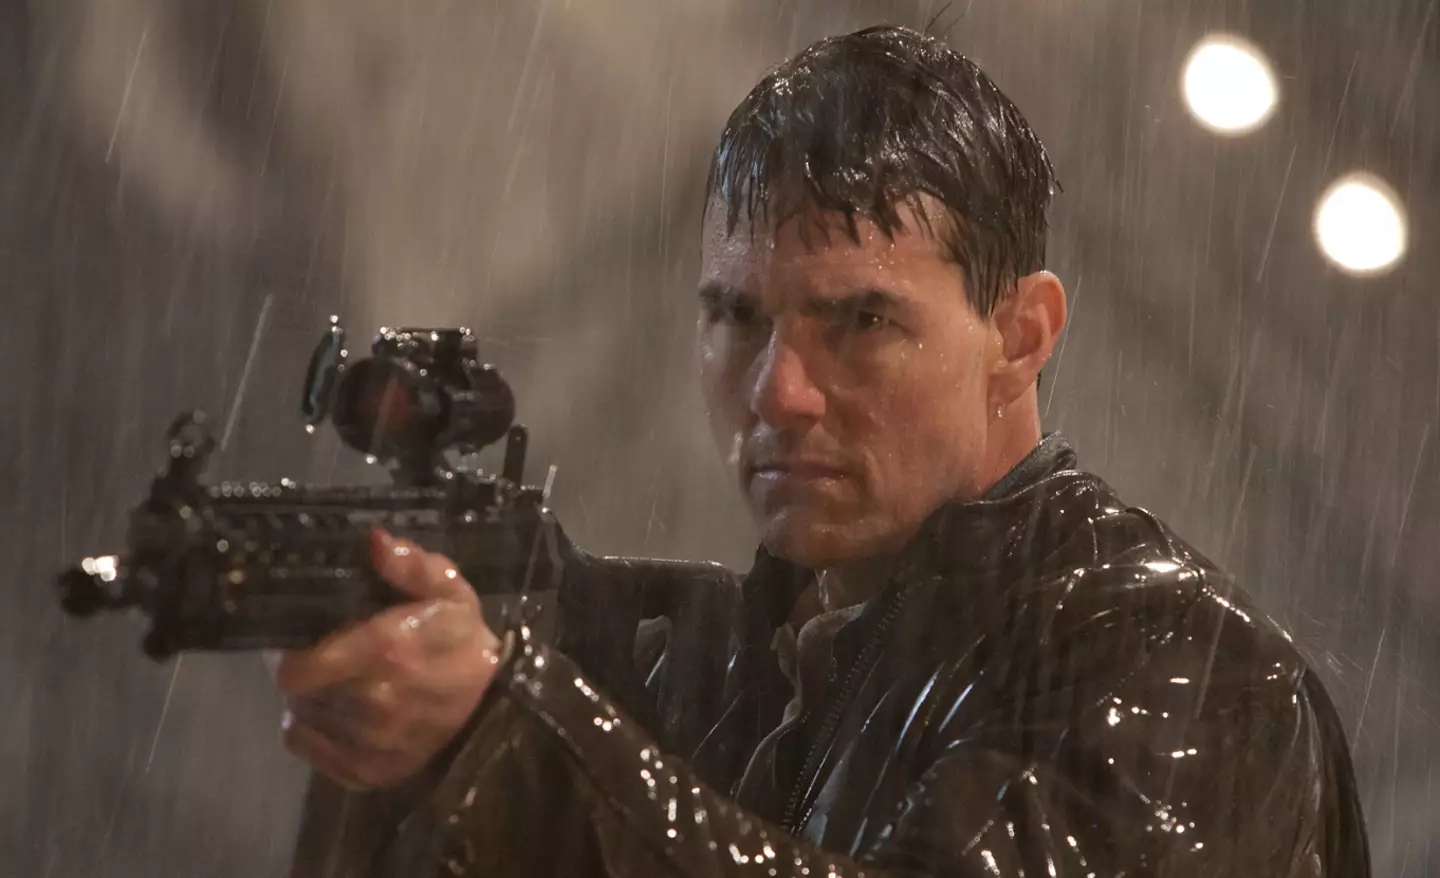 Jack Reacher was followed up with a sequel in 2016.